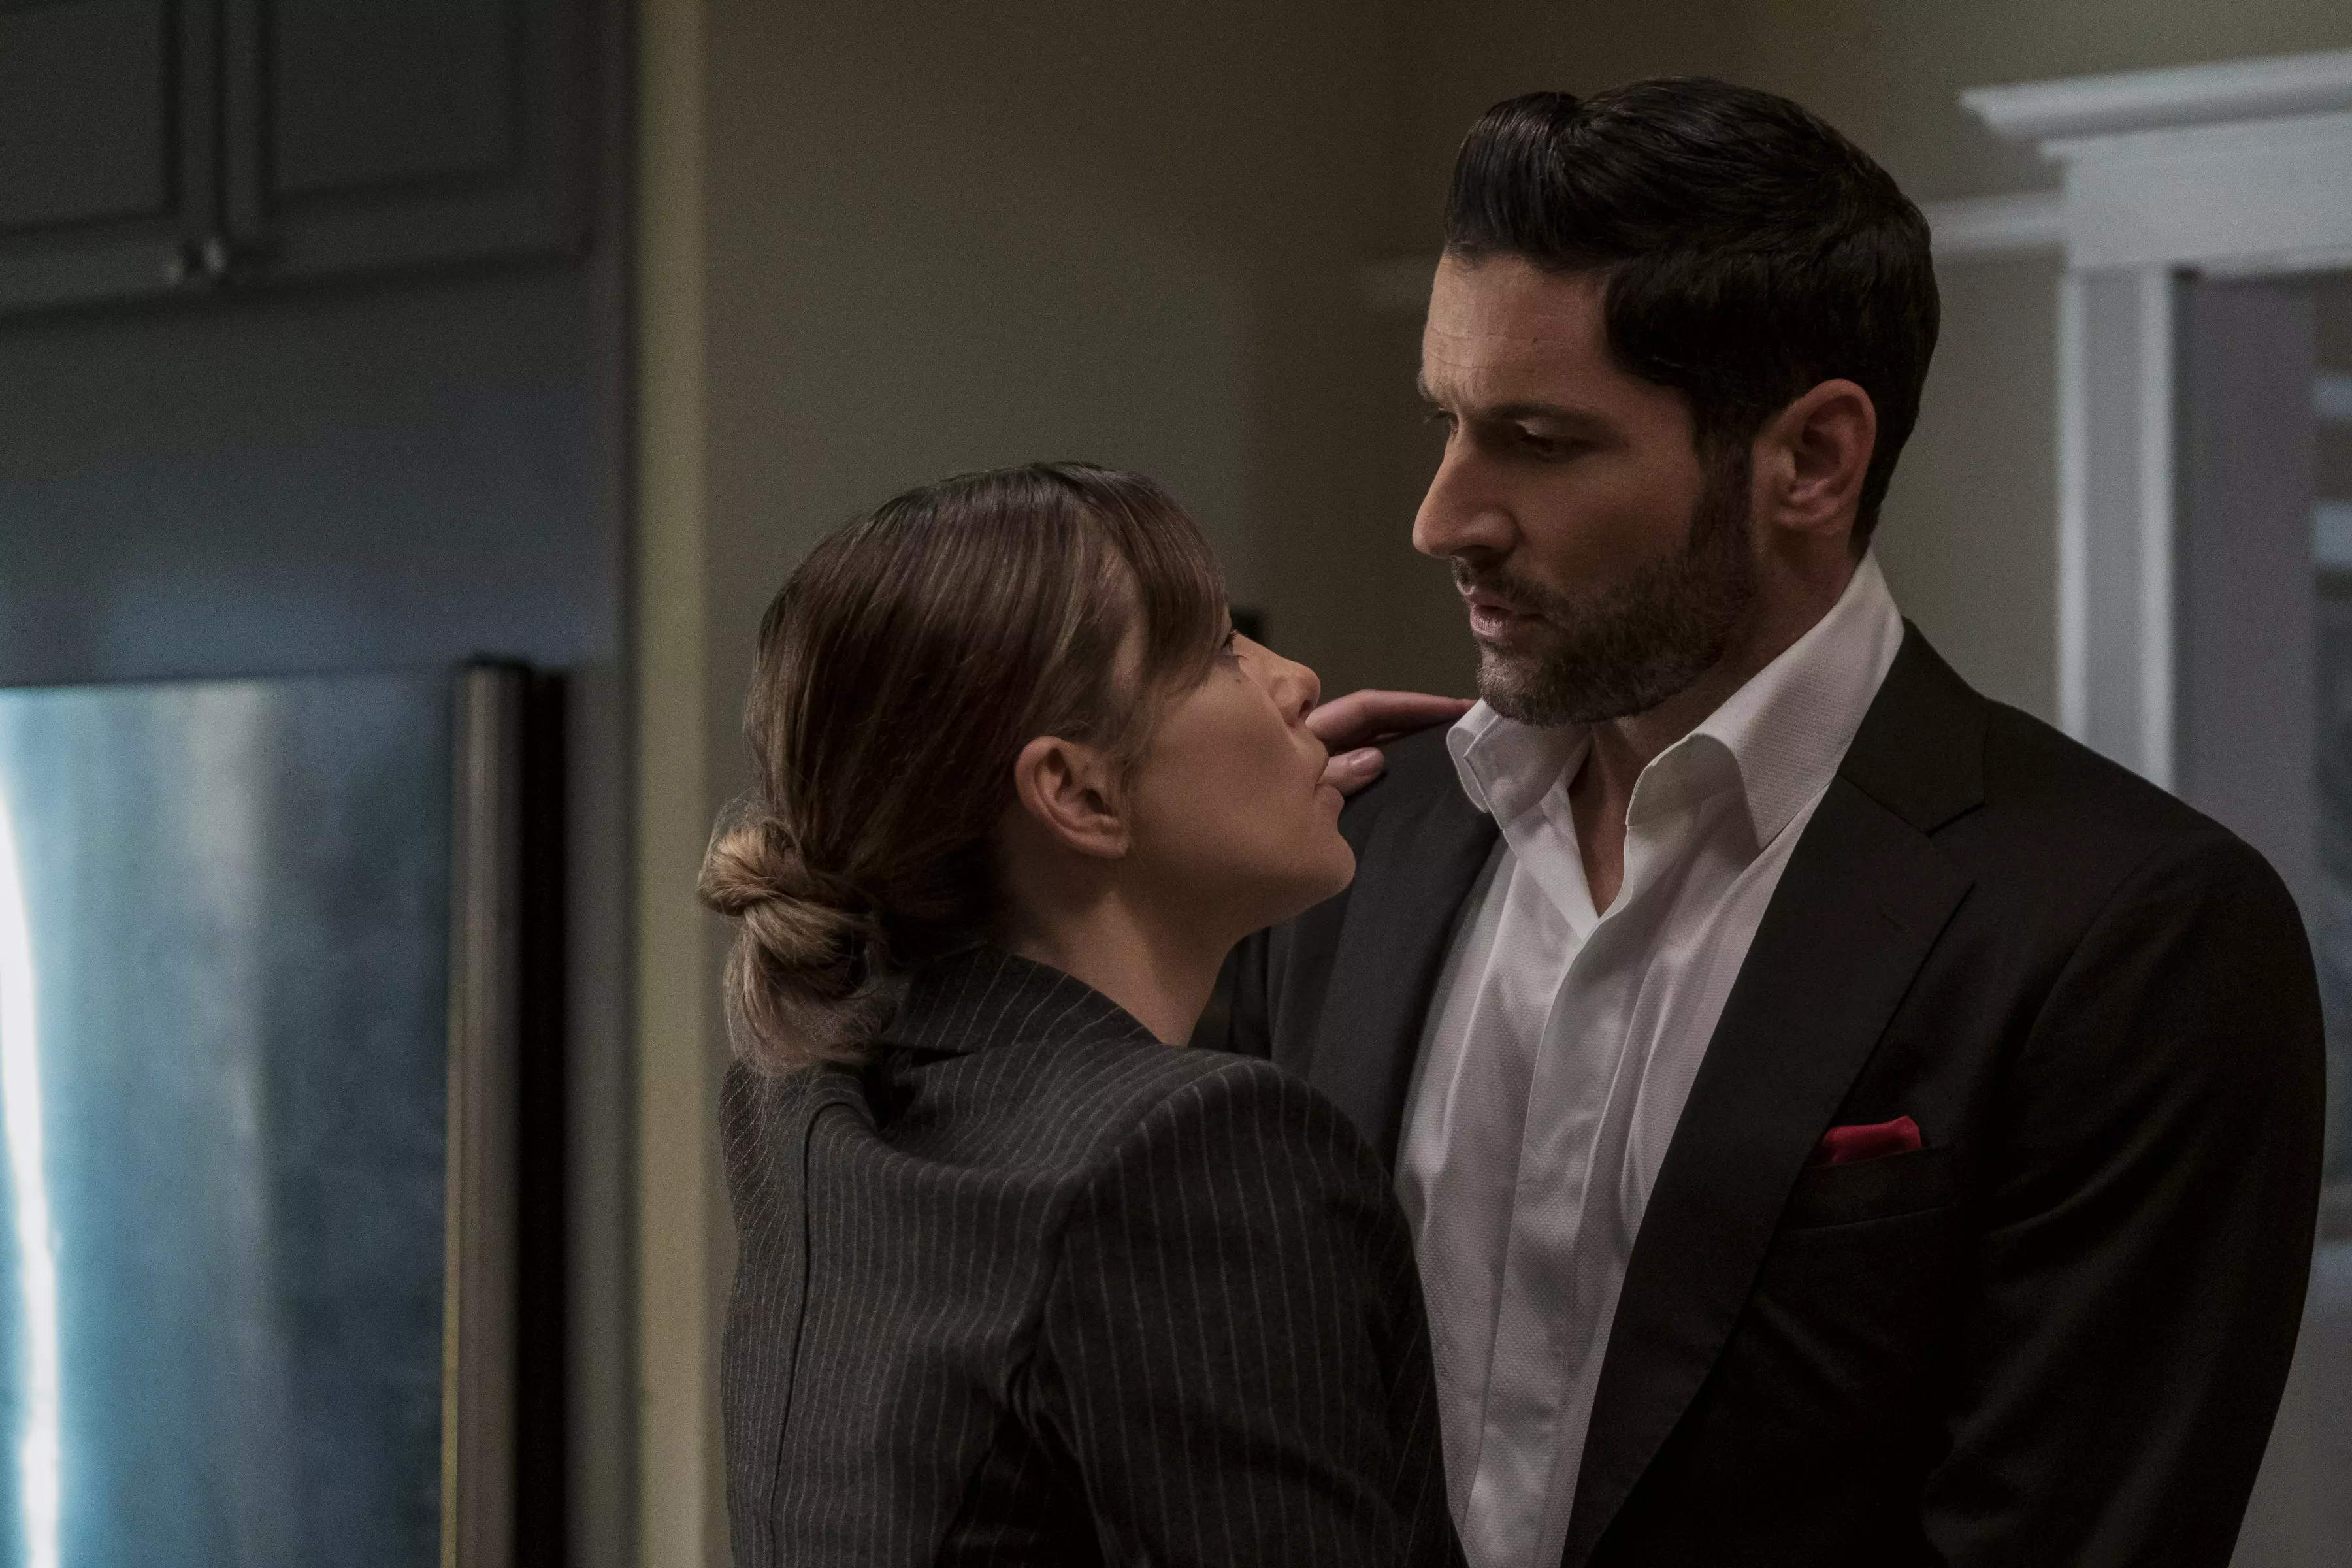 Things heated up between Lucifer and love interest Chloe (